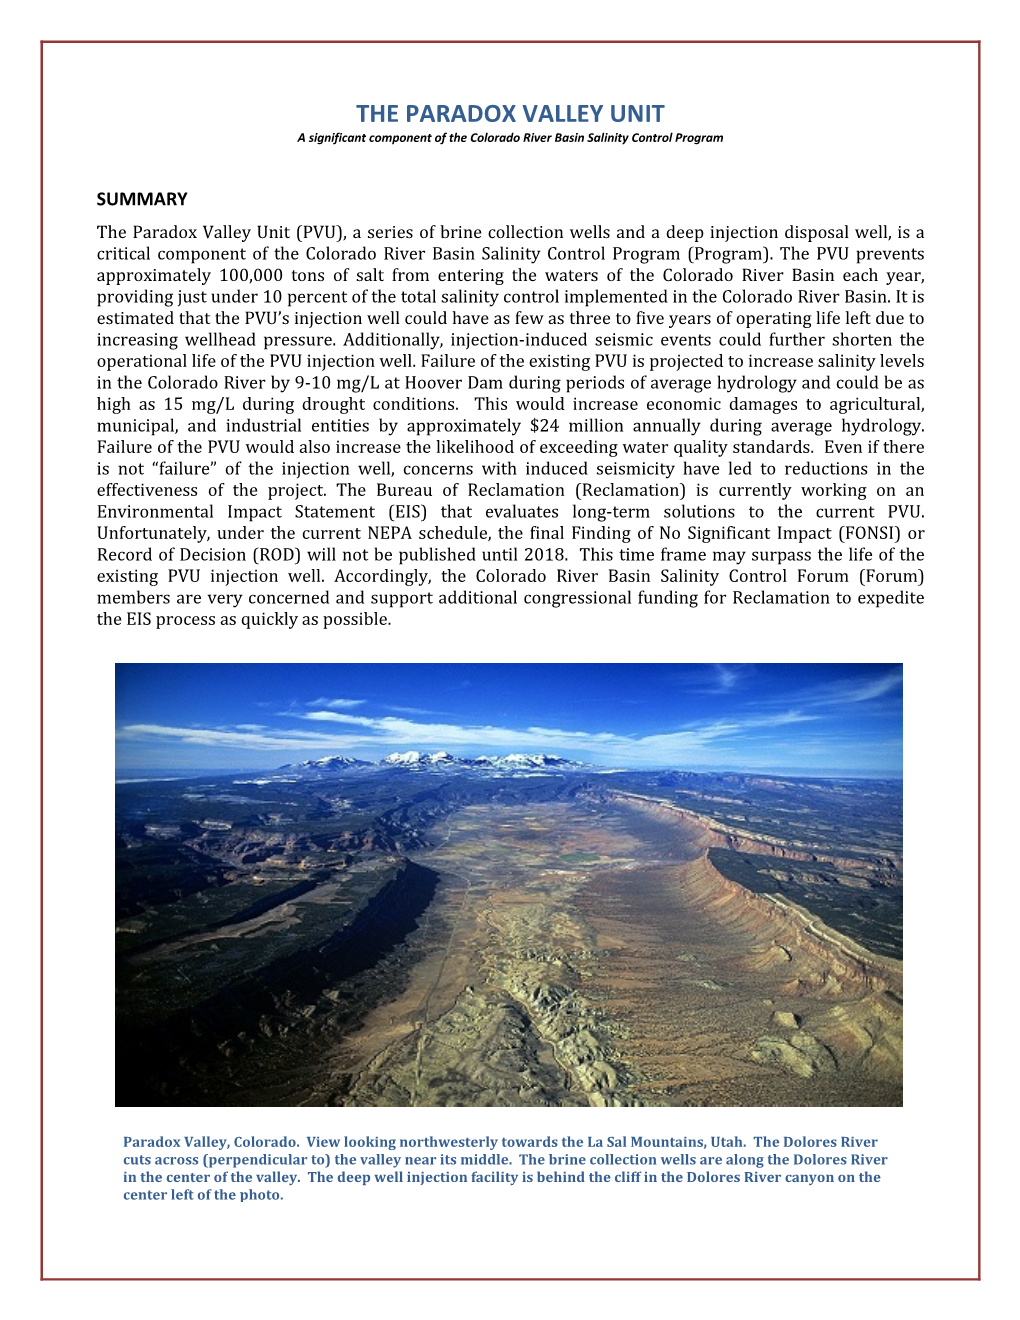 THE PARADOX VALLEY UNIT a Significant Component of the Colorado River Basin Salinity Control Program